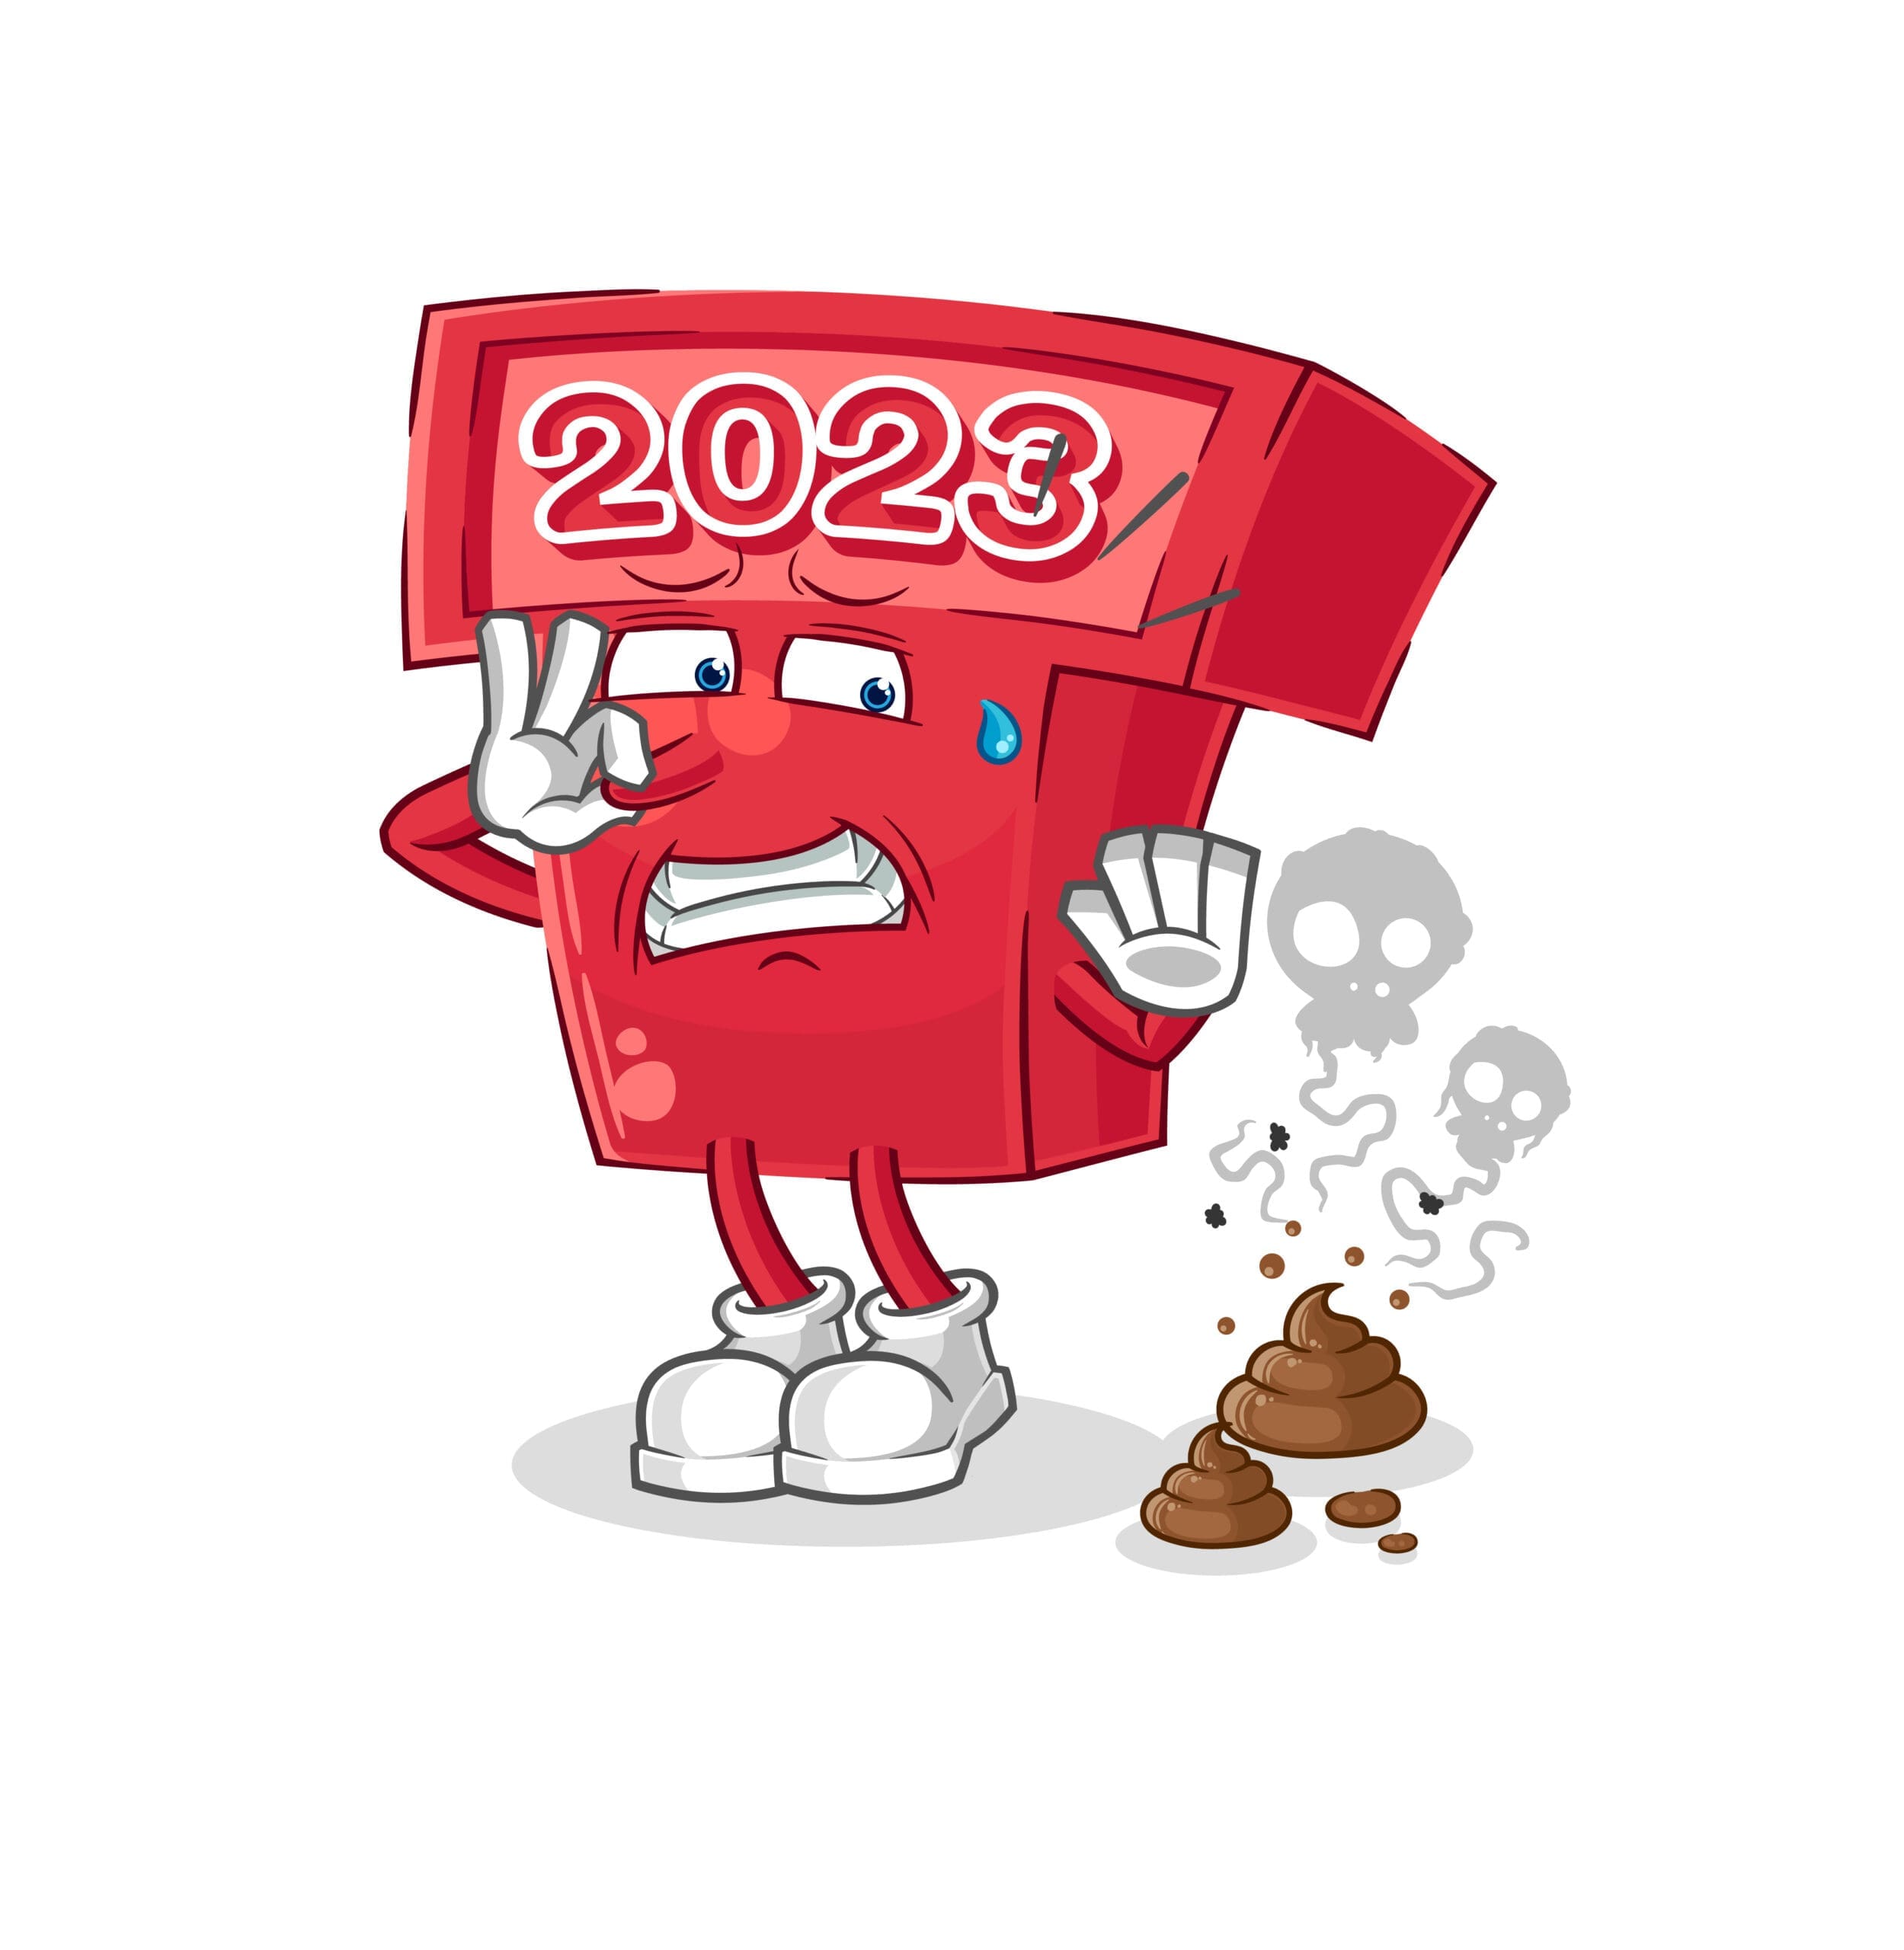 the new year 2023 with stinky waste illustration.